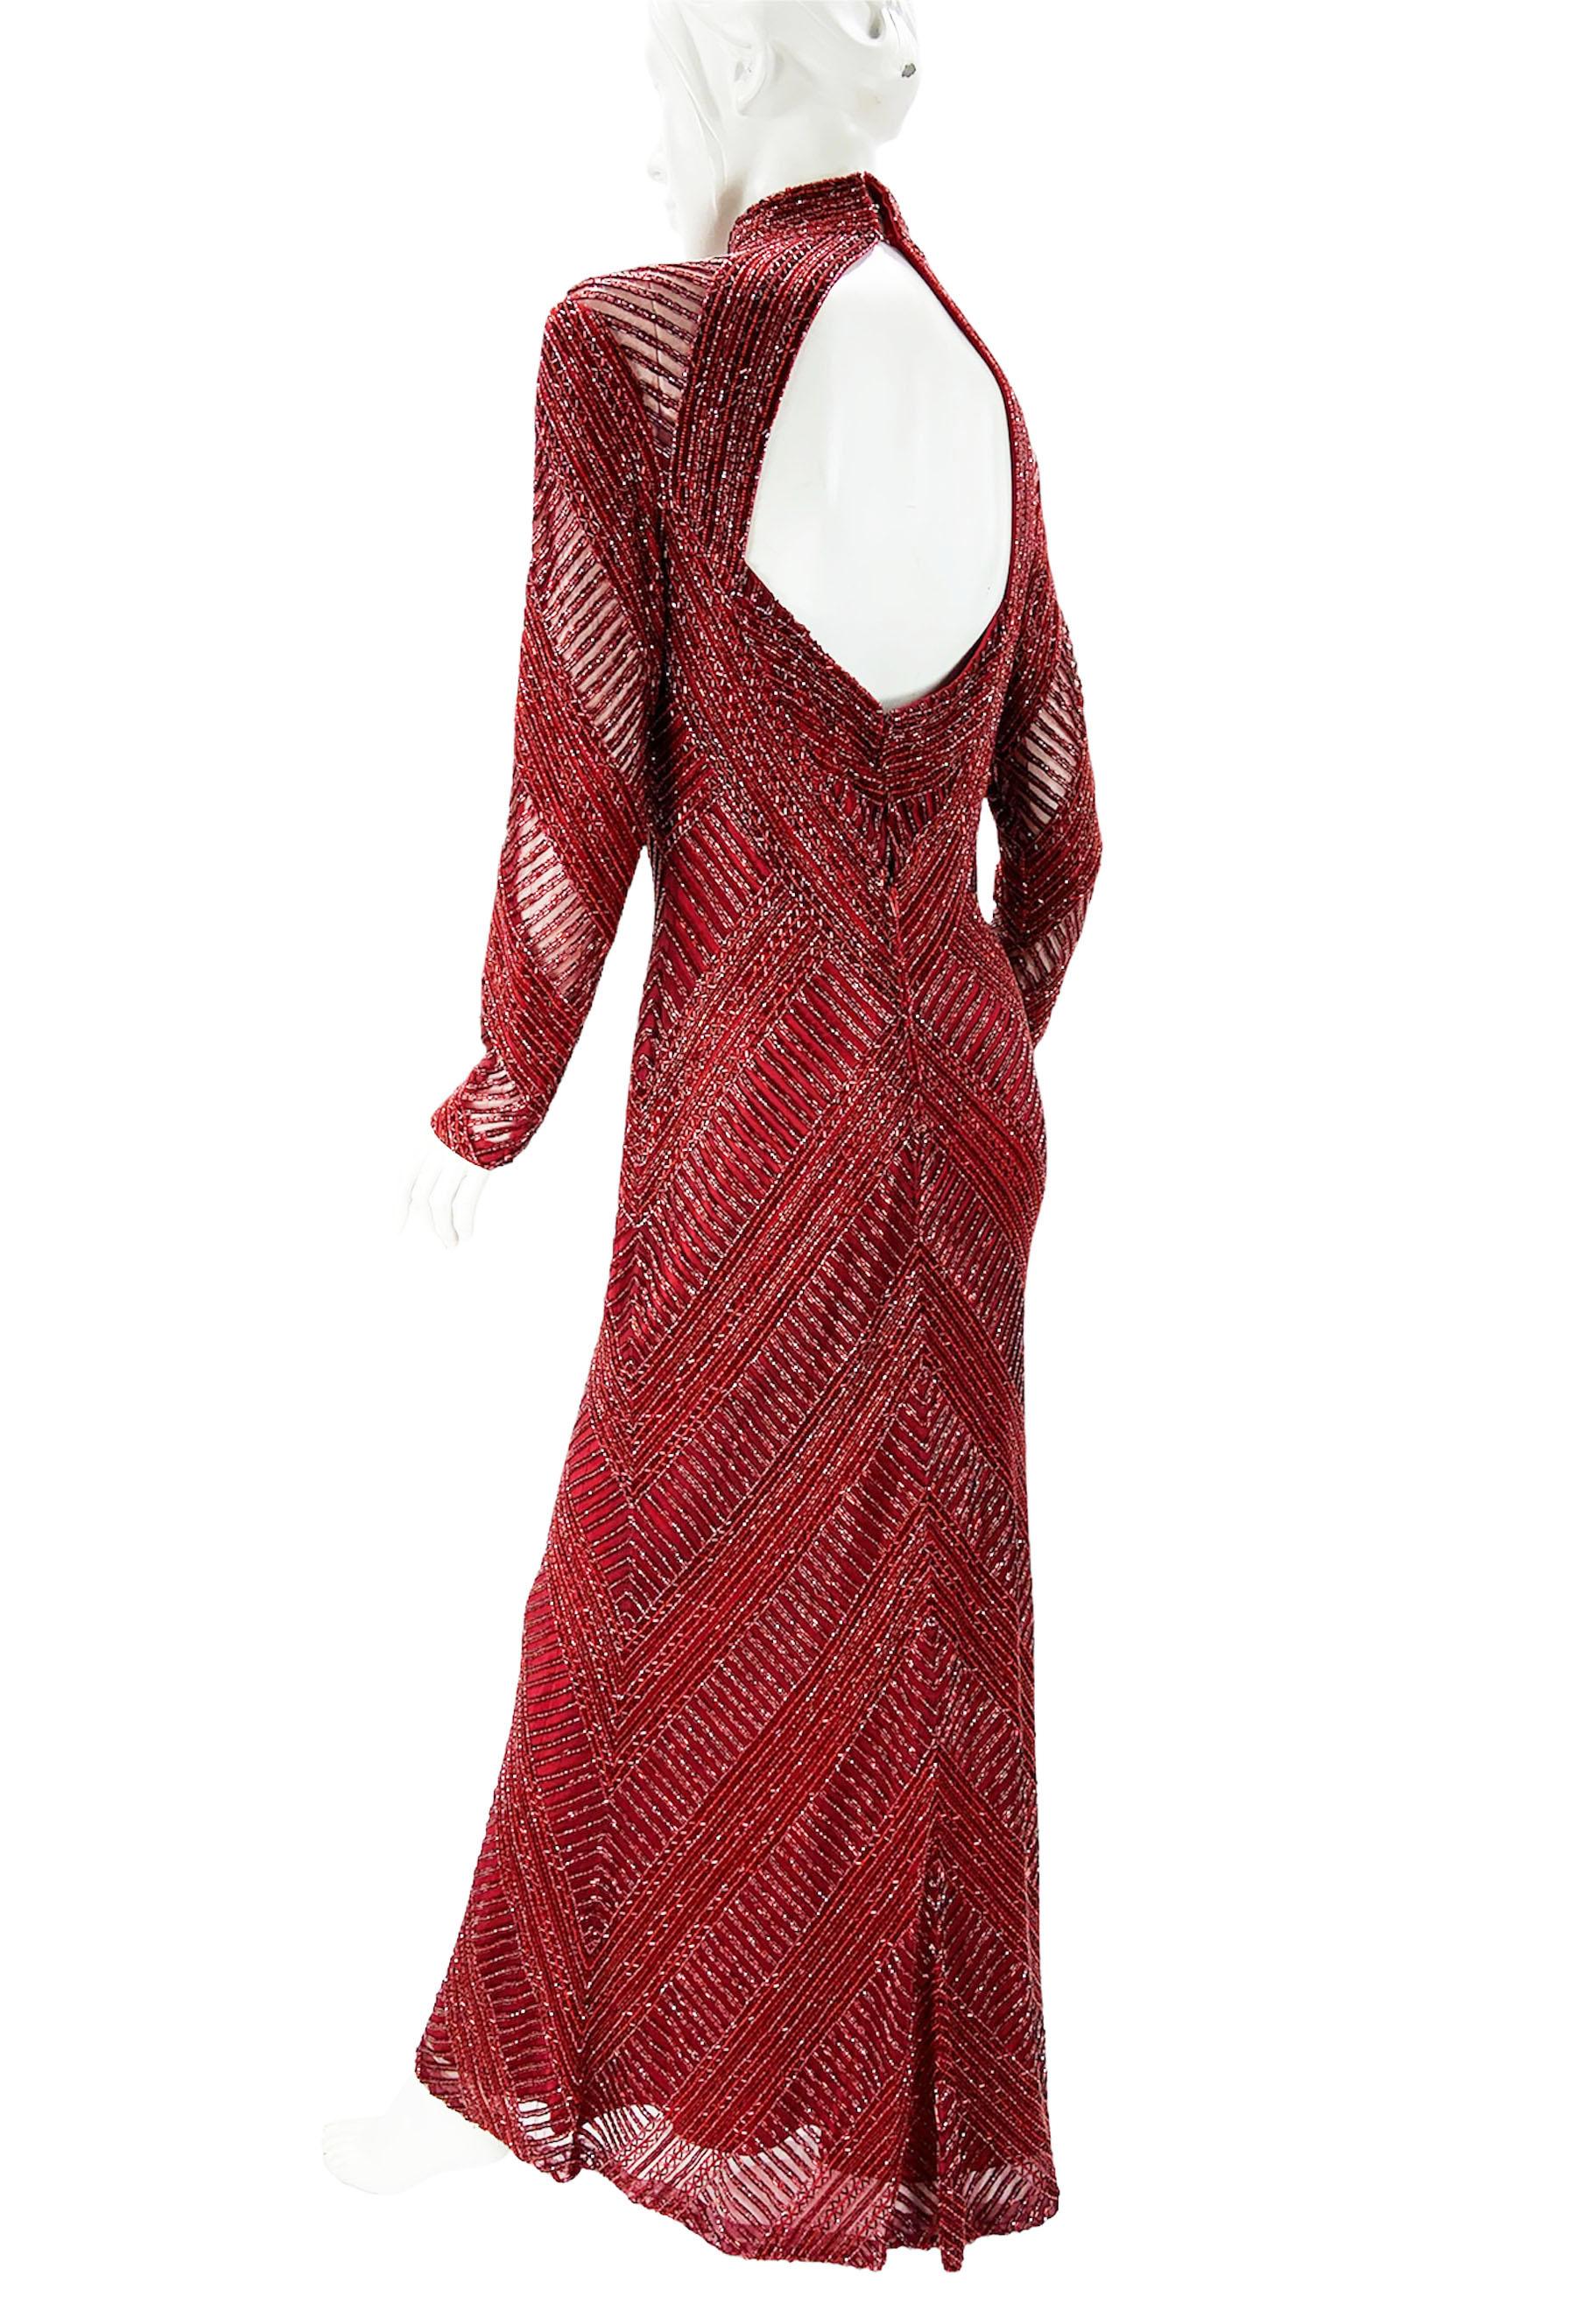 Women's Vintage 80's Bob Mackie Burgundy Fully Beaded Open Back Evening Dress Gown M For Sale